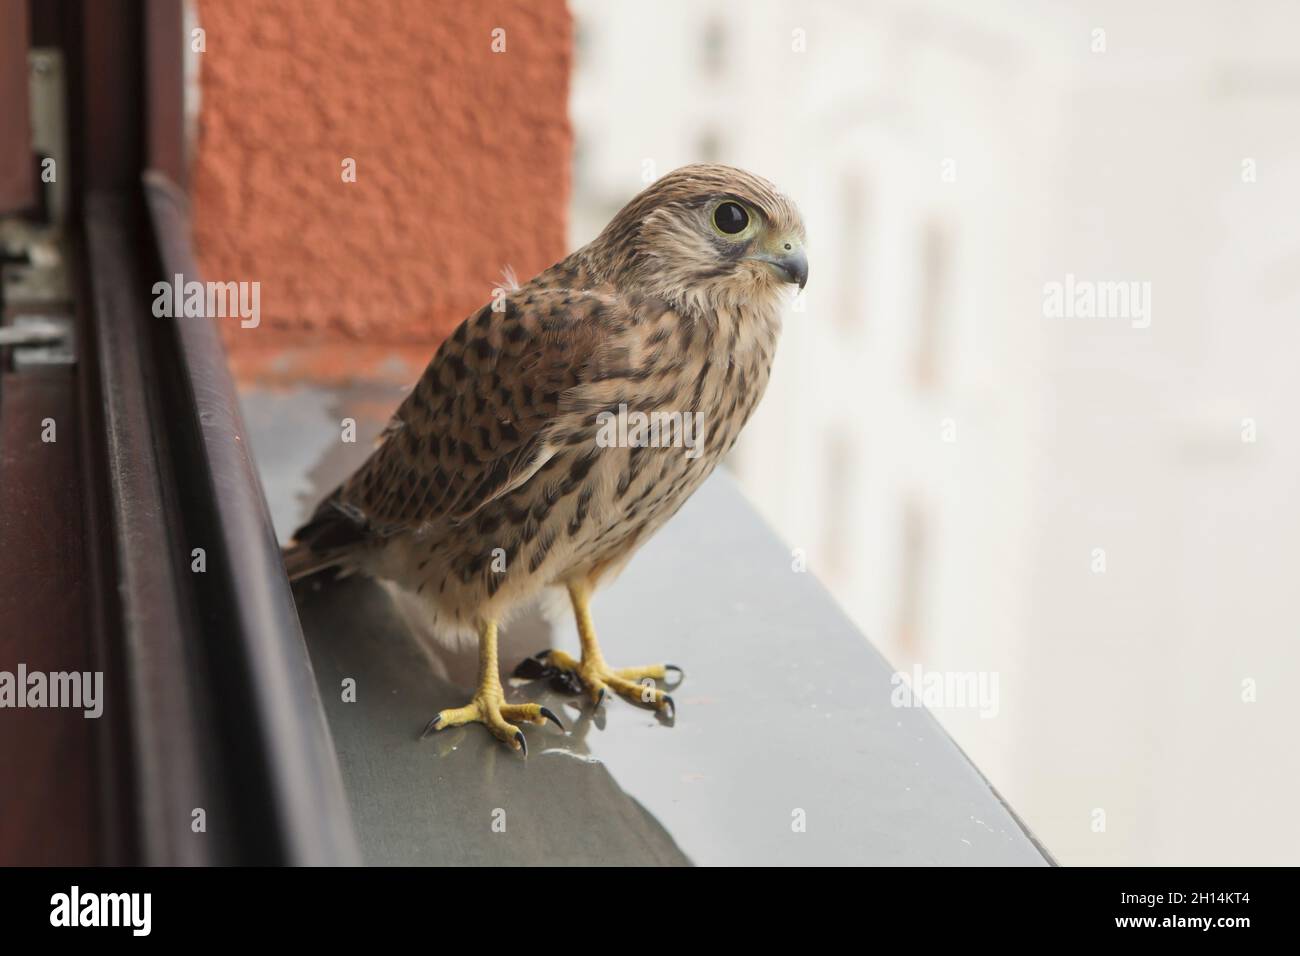 Young common kestrel (Falco tinnunculus) pictured in Prague, Czech Republic. The kestrel is pictured in the day when it flies for the first time. Stock Photo